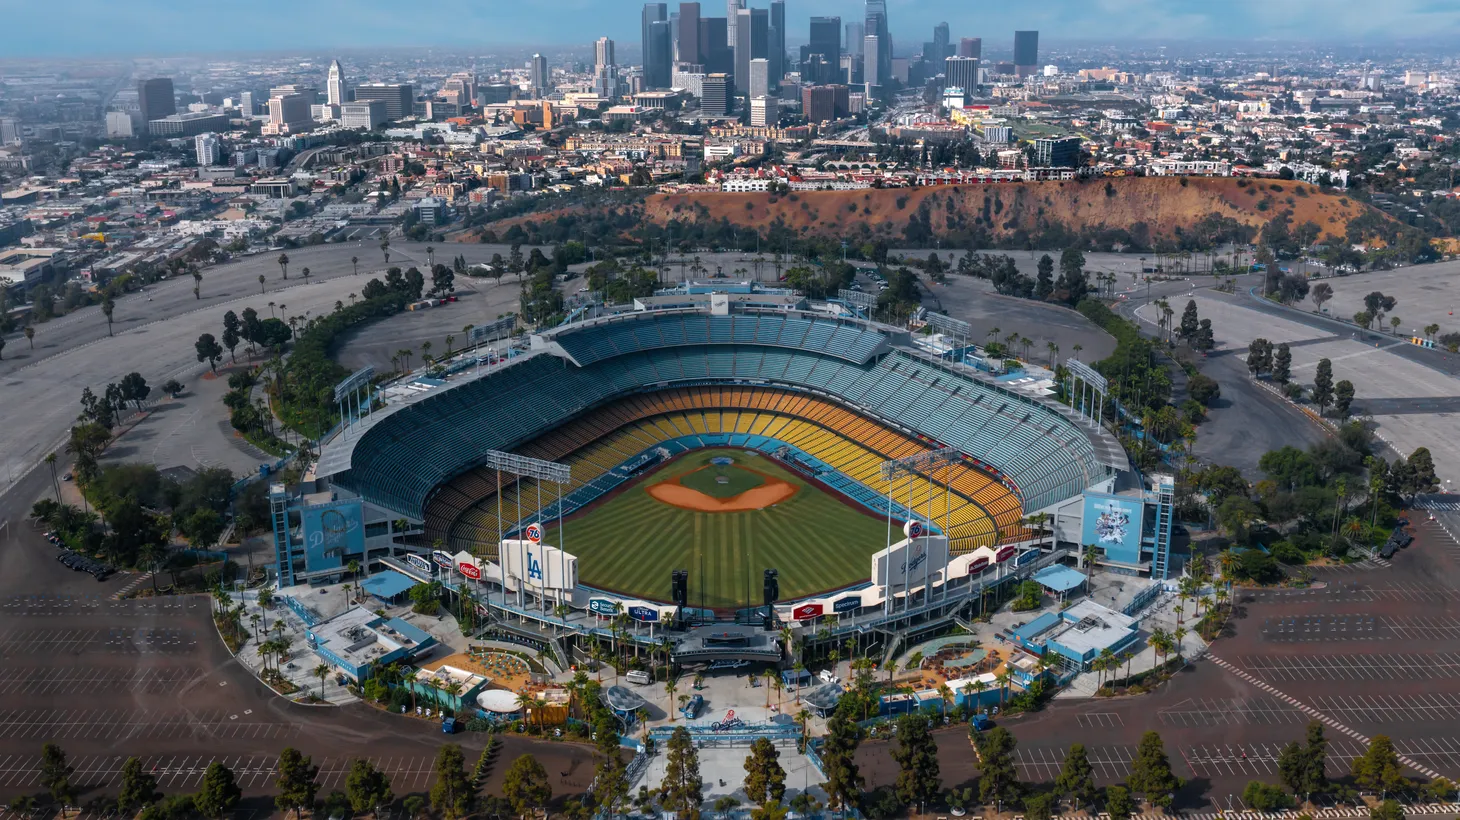 Dodger Stadium will host the All-Star game next week, but stadium employees are threatening to strike. Photo by Shutterstock.